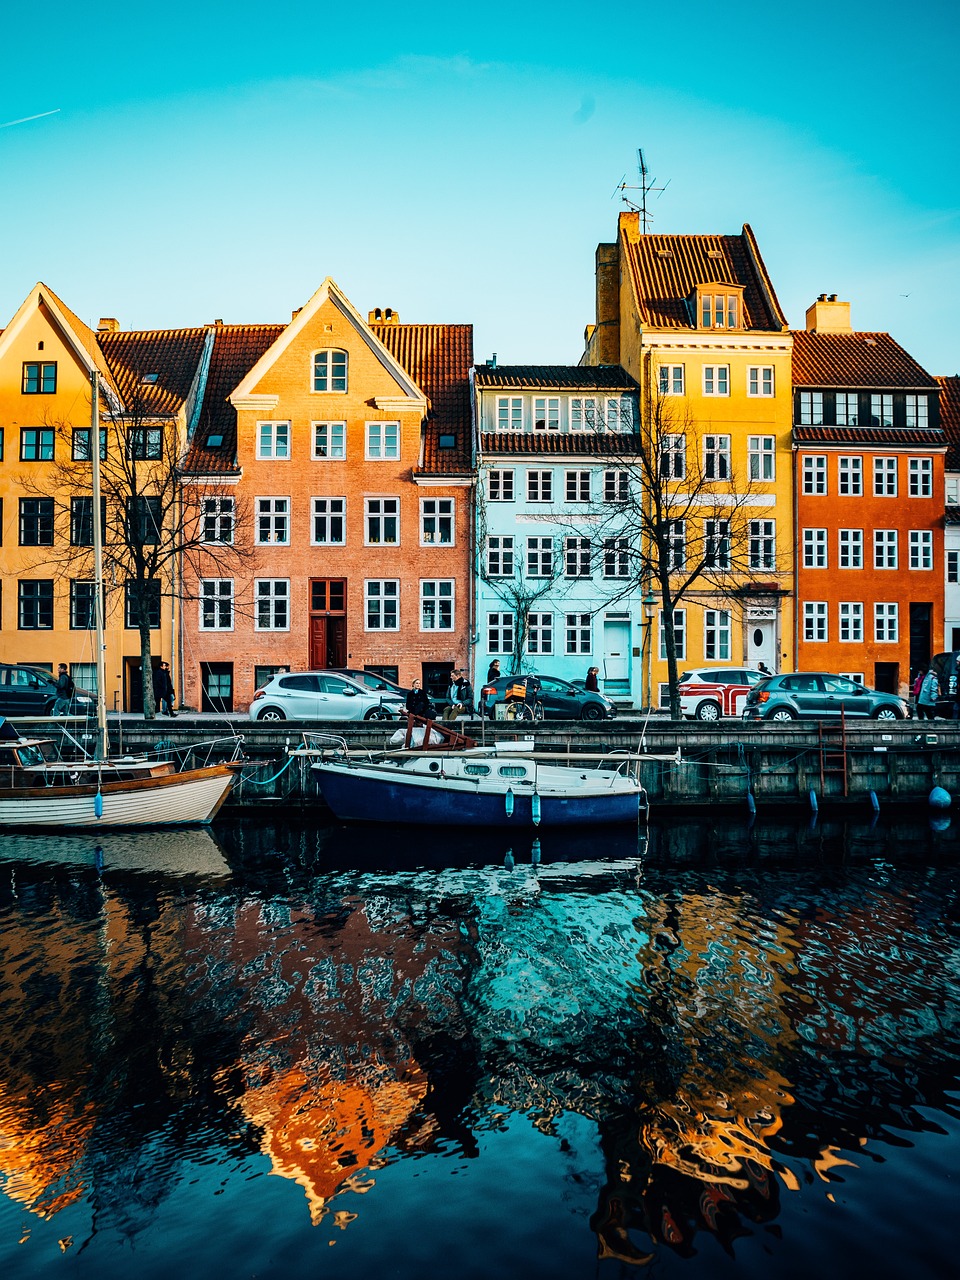 A Week of Culinary Delights and Nightlife in Copenhagen